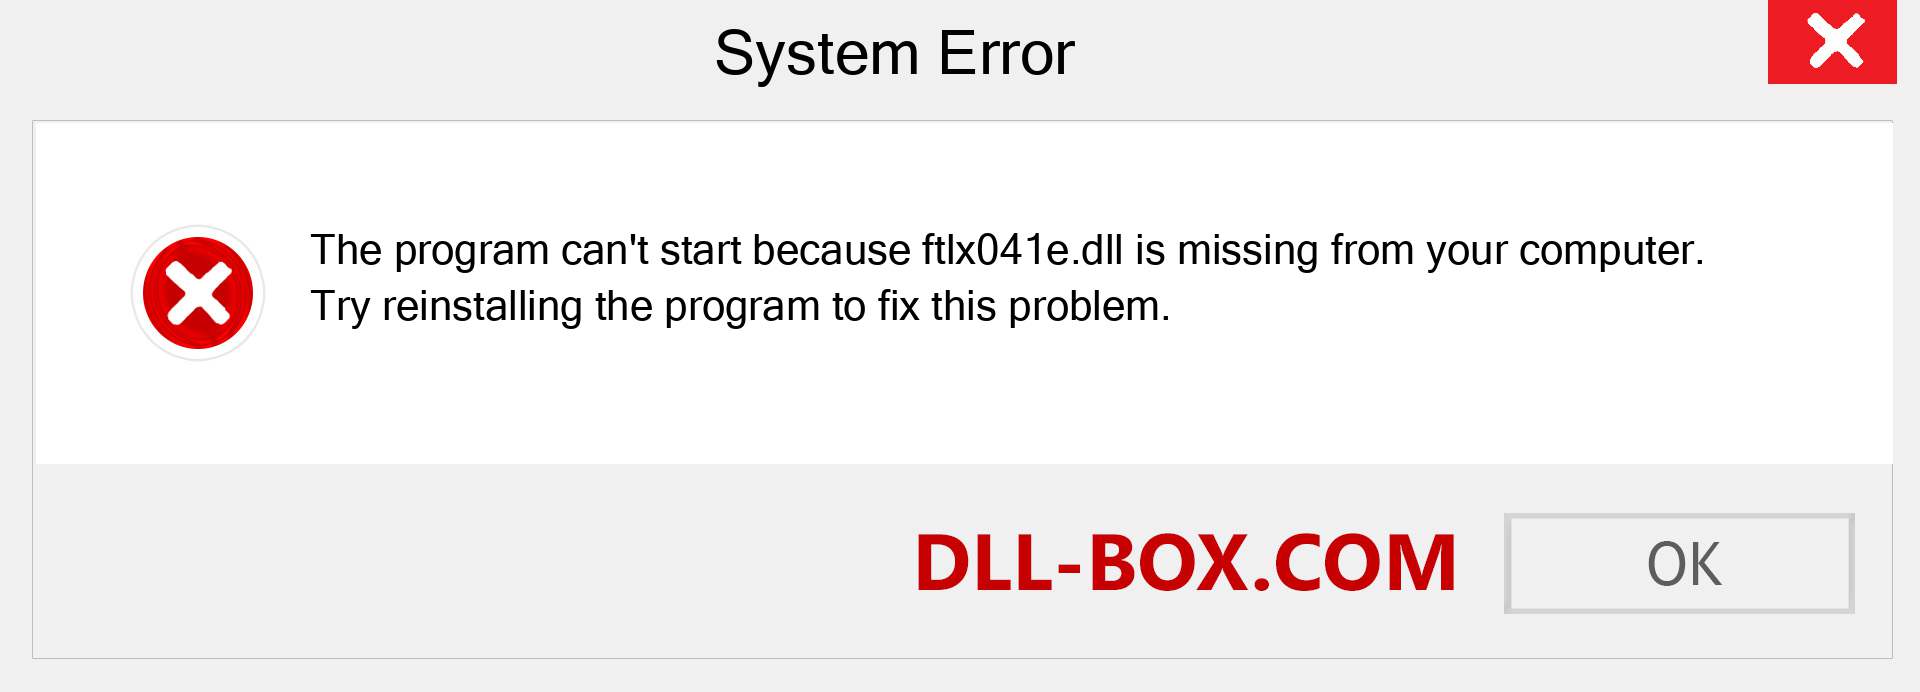  ftlx041e.dll file is missing?. Download for Windows 7, 8, 10 - Fix  ftlx041e dll Missing Error on Windows, photos, images